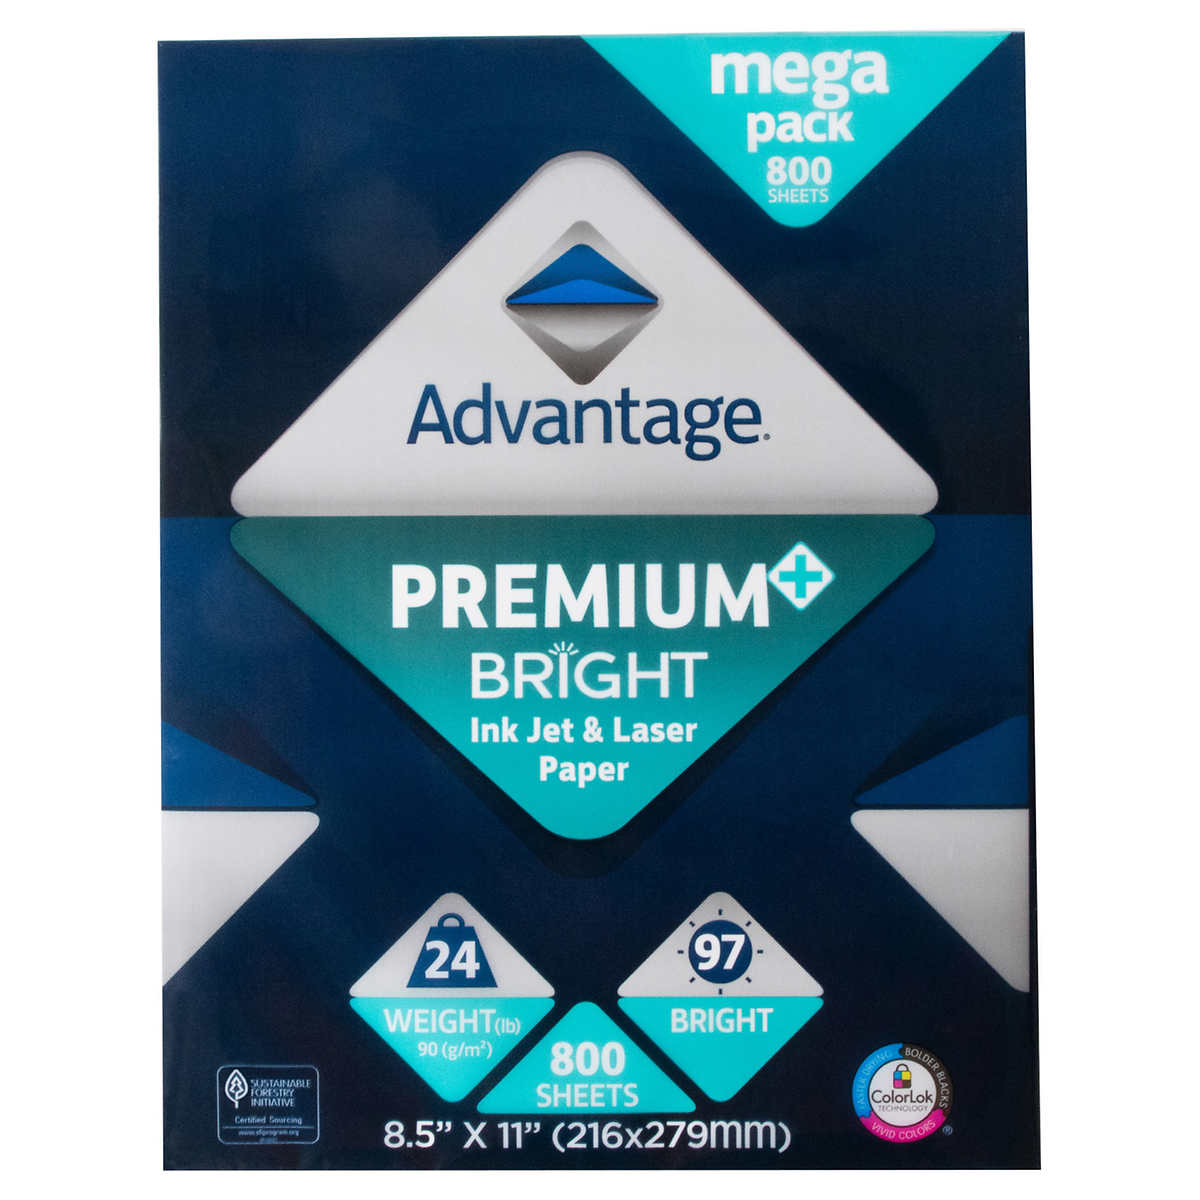 Advantage Premium Bright Ink Jet and Laser Paper, 8.5x11 Letter, White,  24lb, 97 Bright, 1 Ream of 800 Sheets